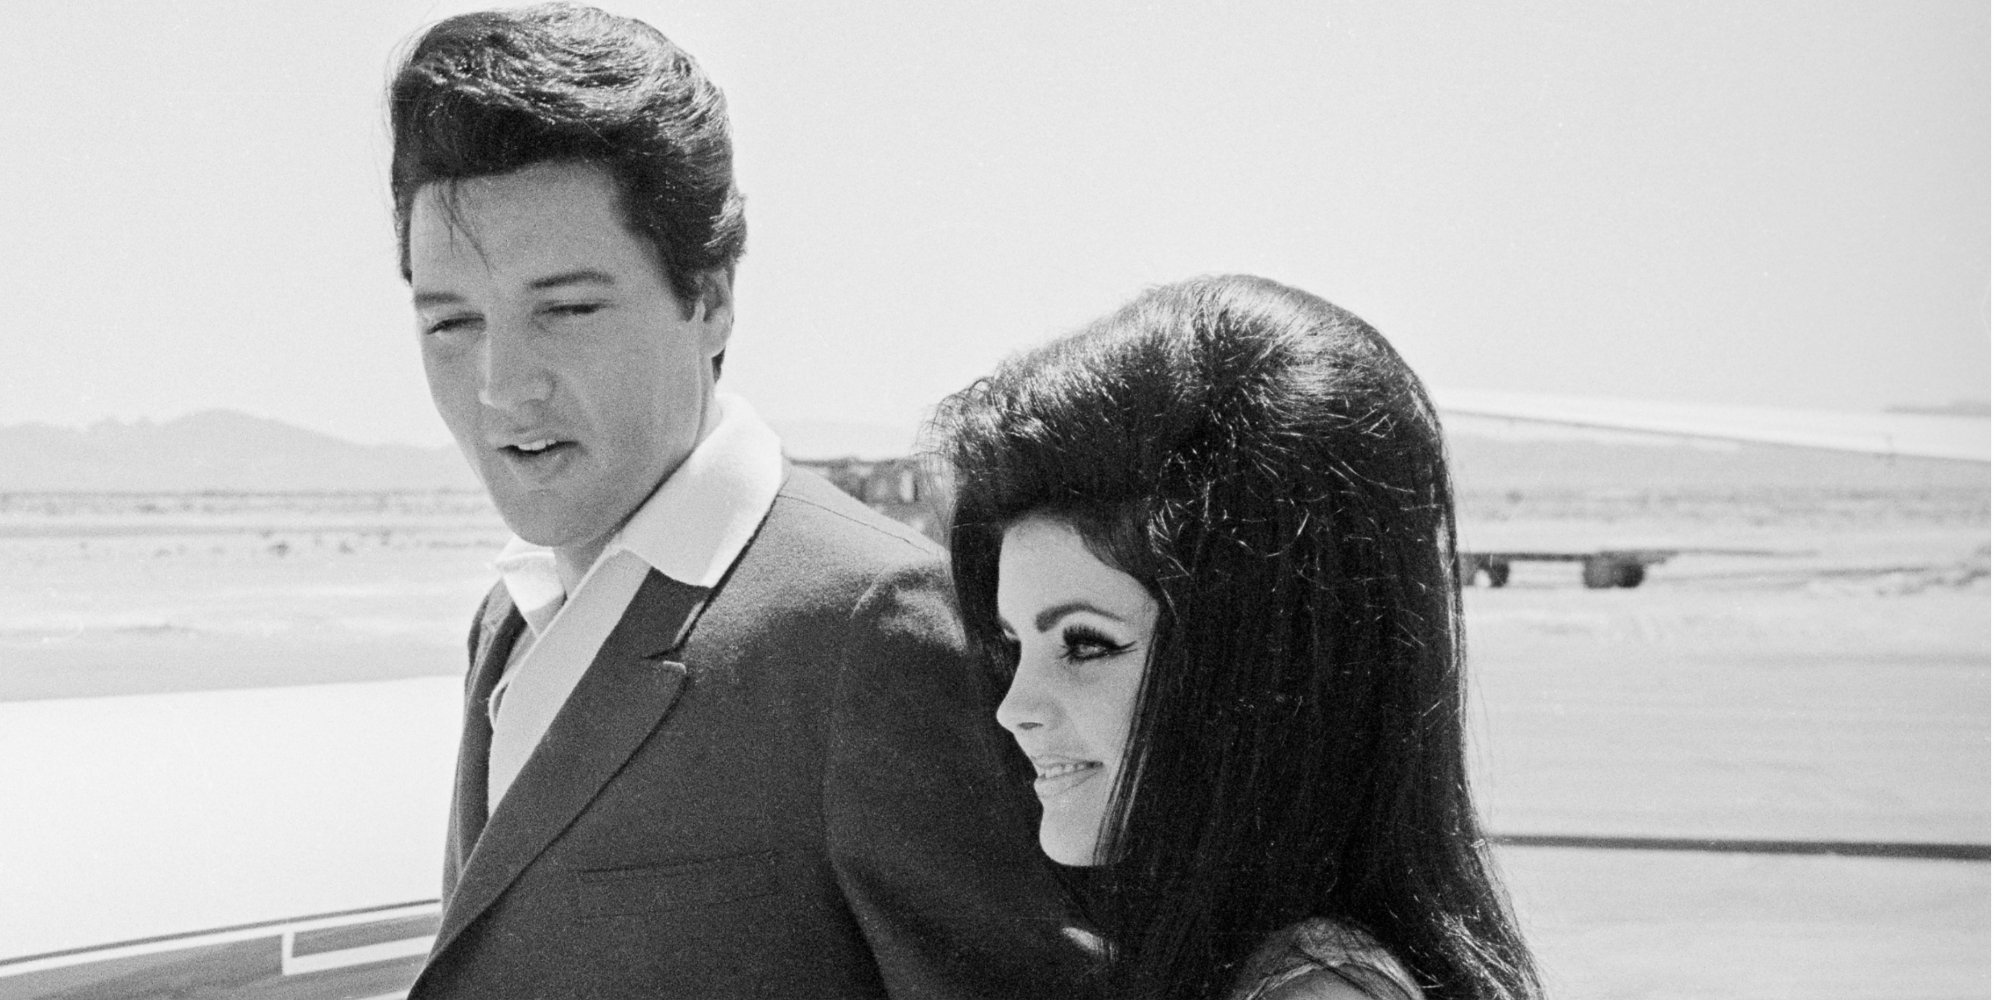 Elvis Presley broke a promise to Priscilla's parents that could have ended their relationship.